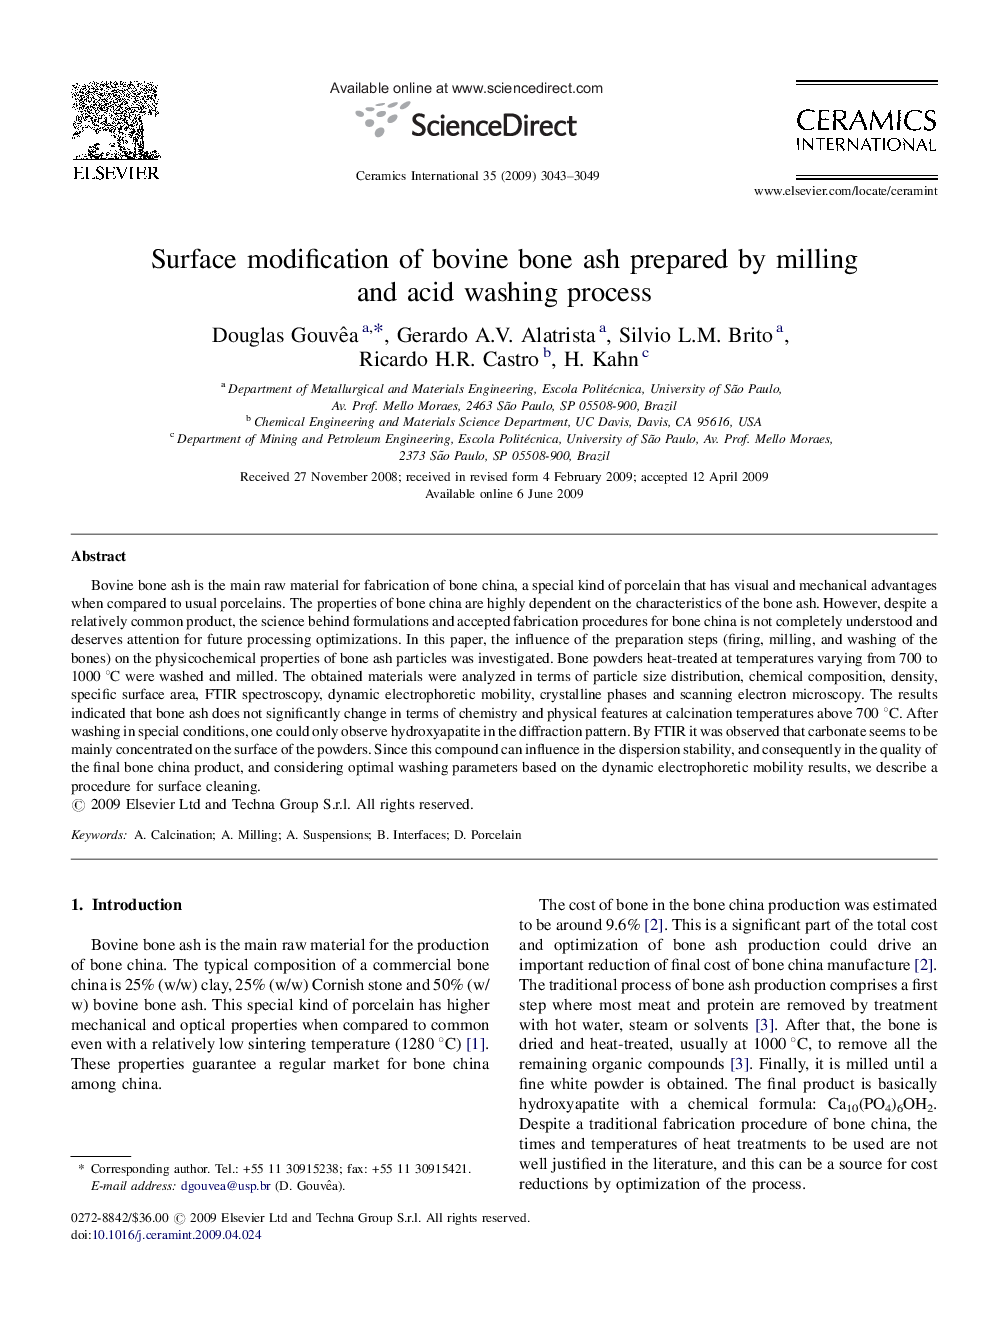 Surface modification of bovine bone ash prepared by milling and acid washing process